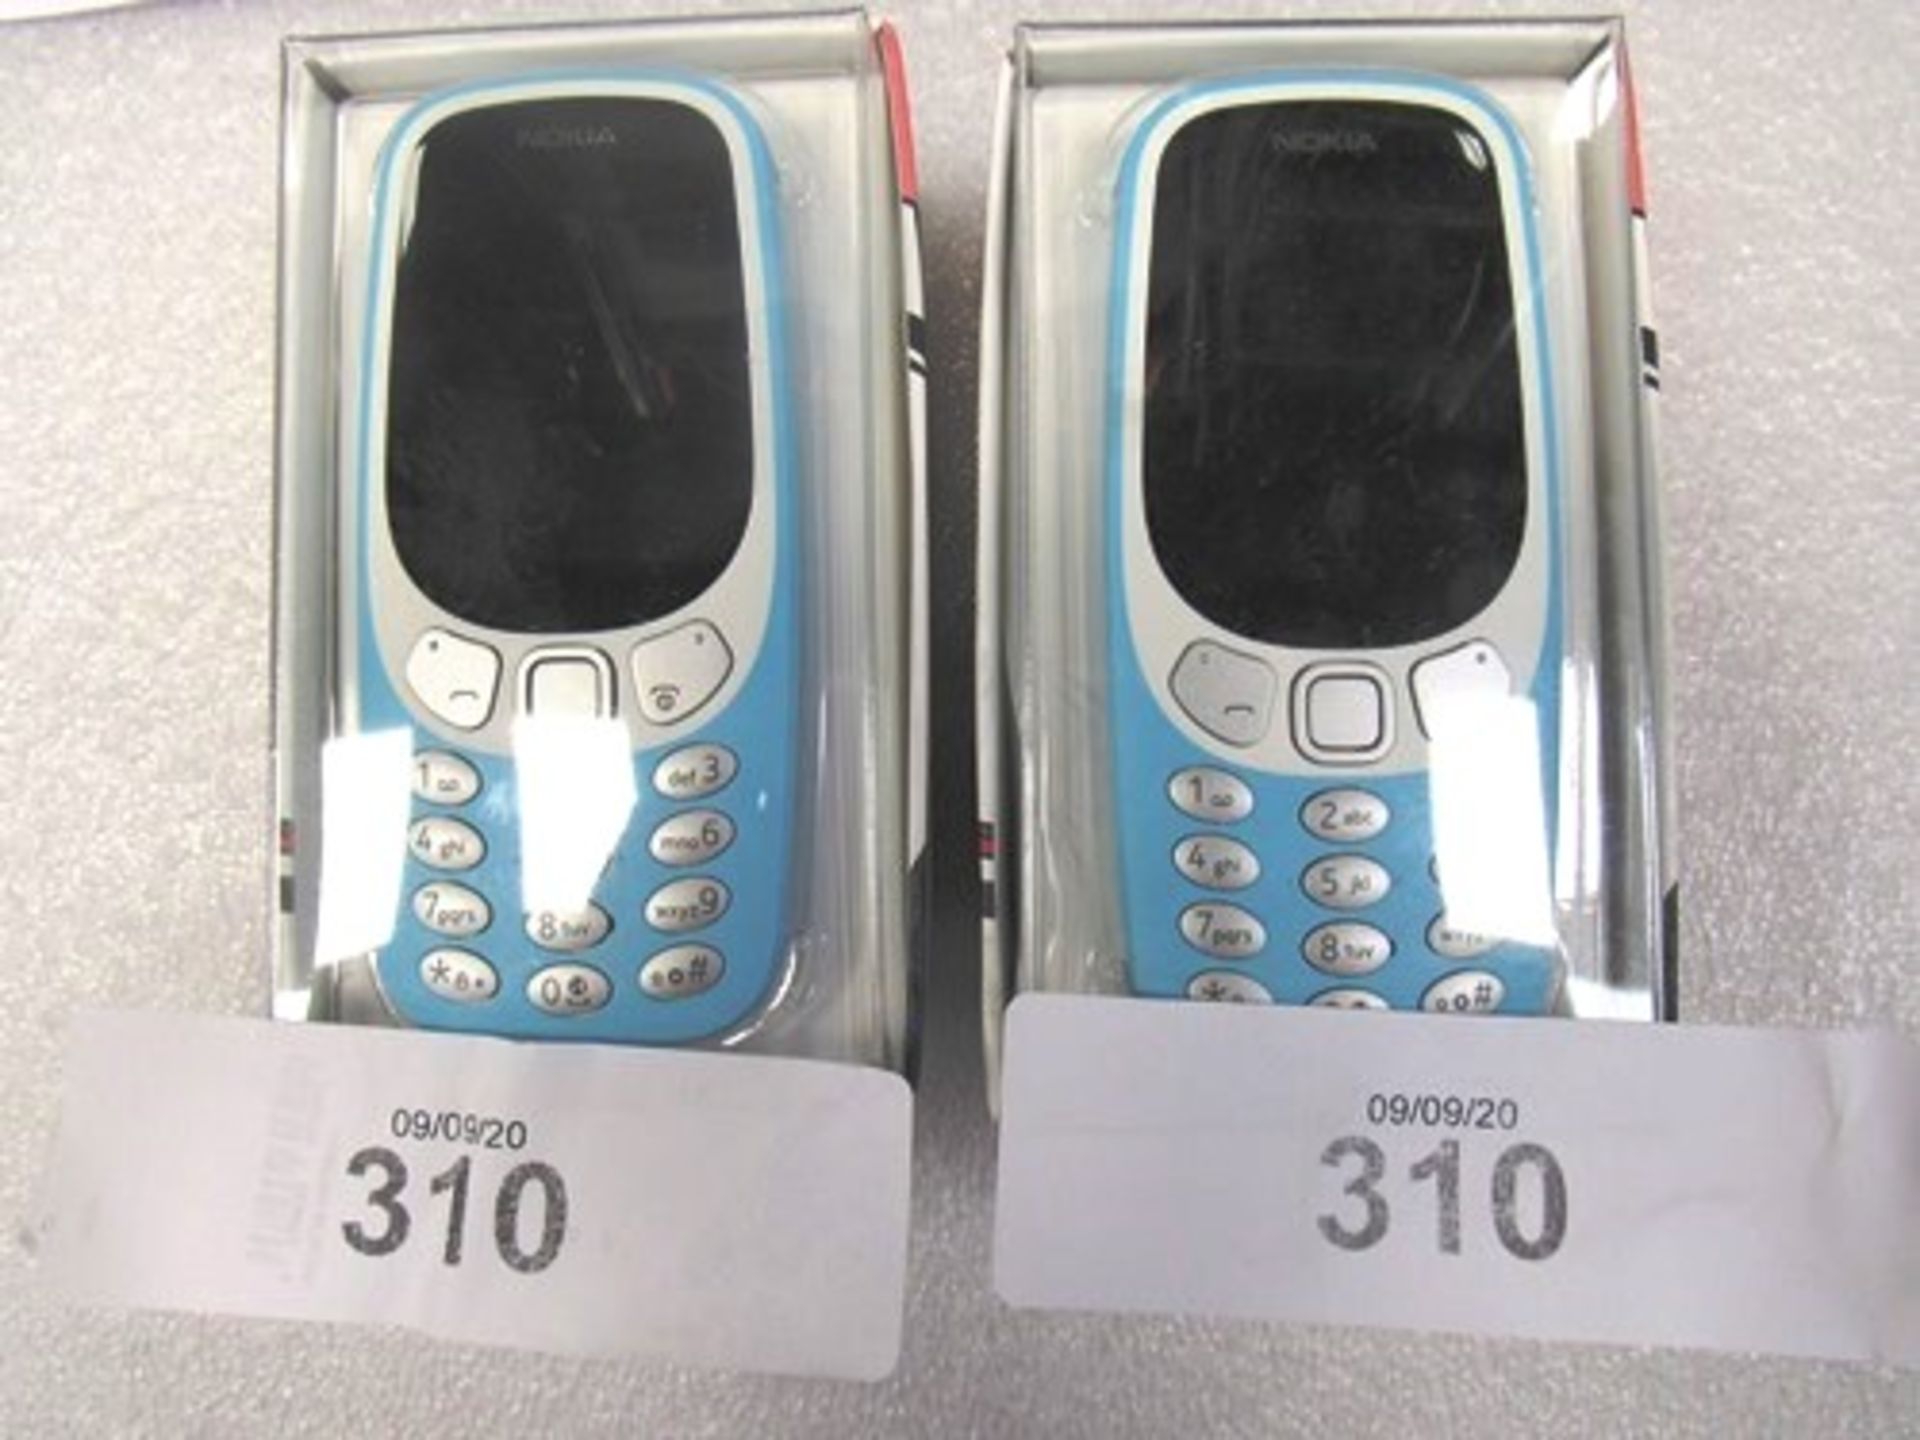 2 x Nokia 33103G phones , REF: TA-1022, IMEI: 355819091042071 and 35581909101982 - 1 x Sealed new